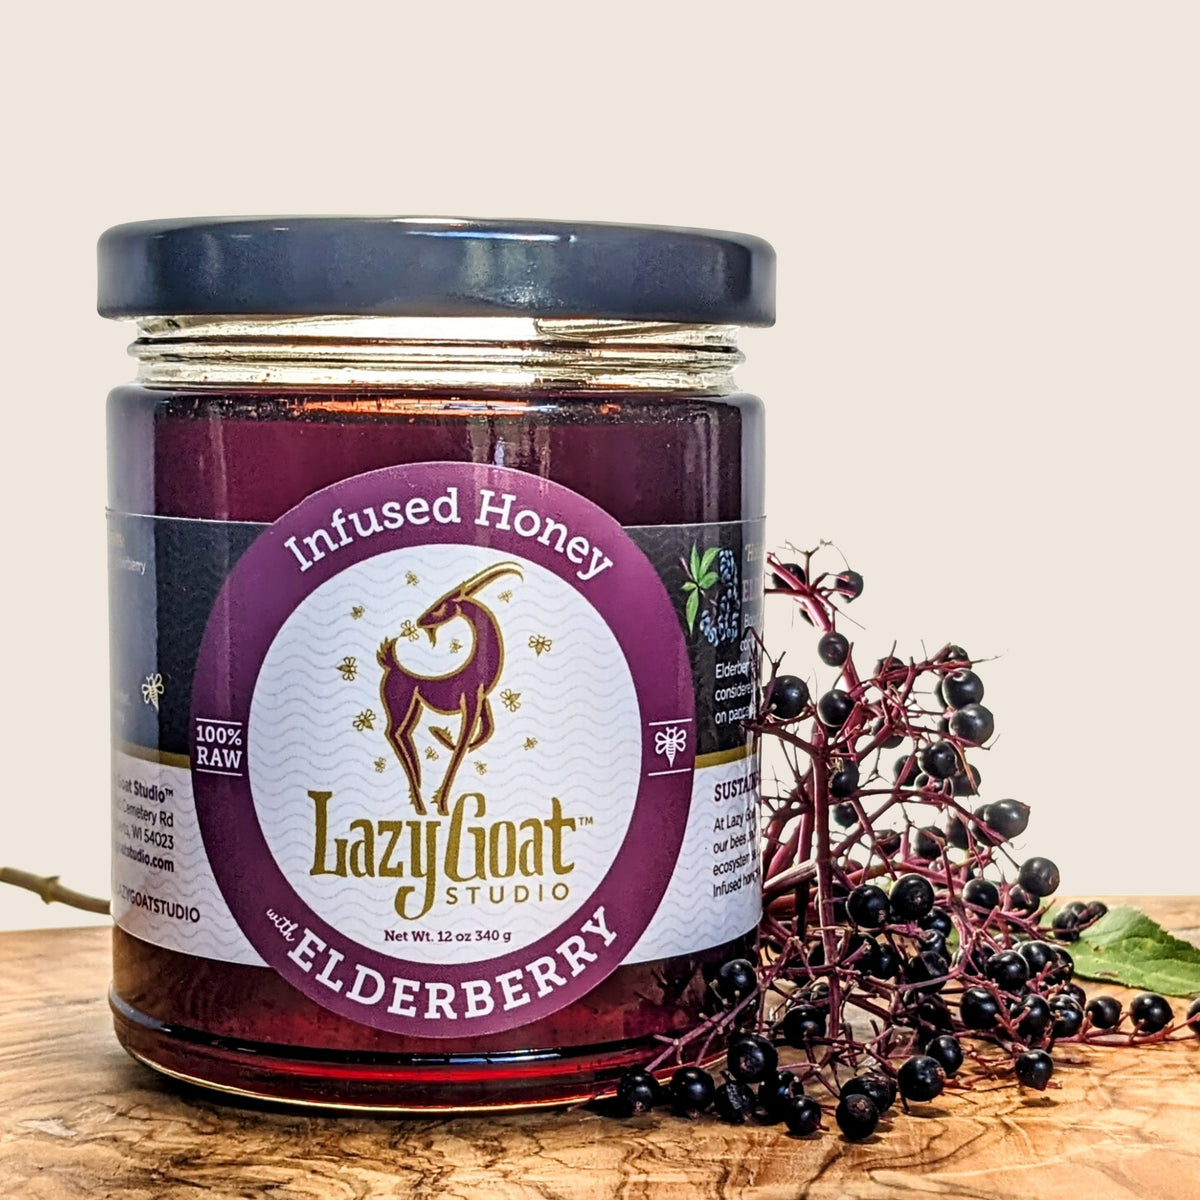 12oz of our delicious Elderberry Infused raw honey in a glass jar.